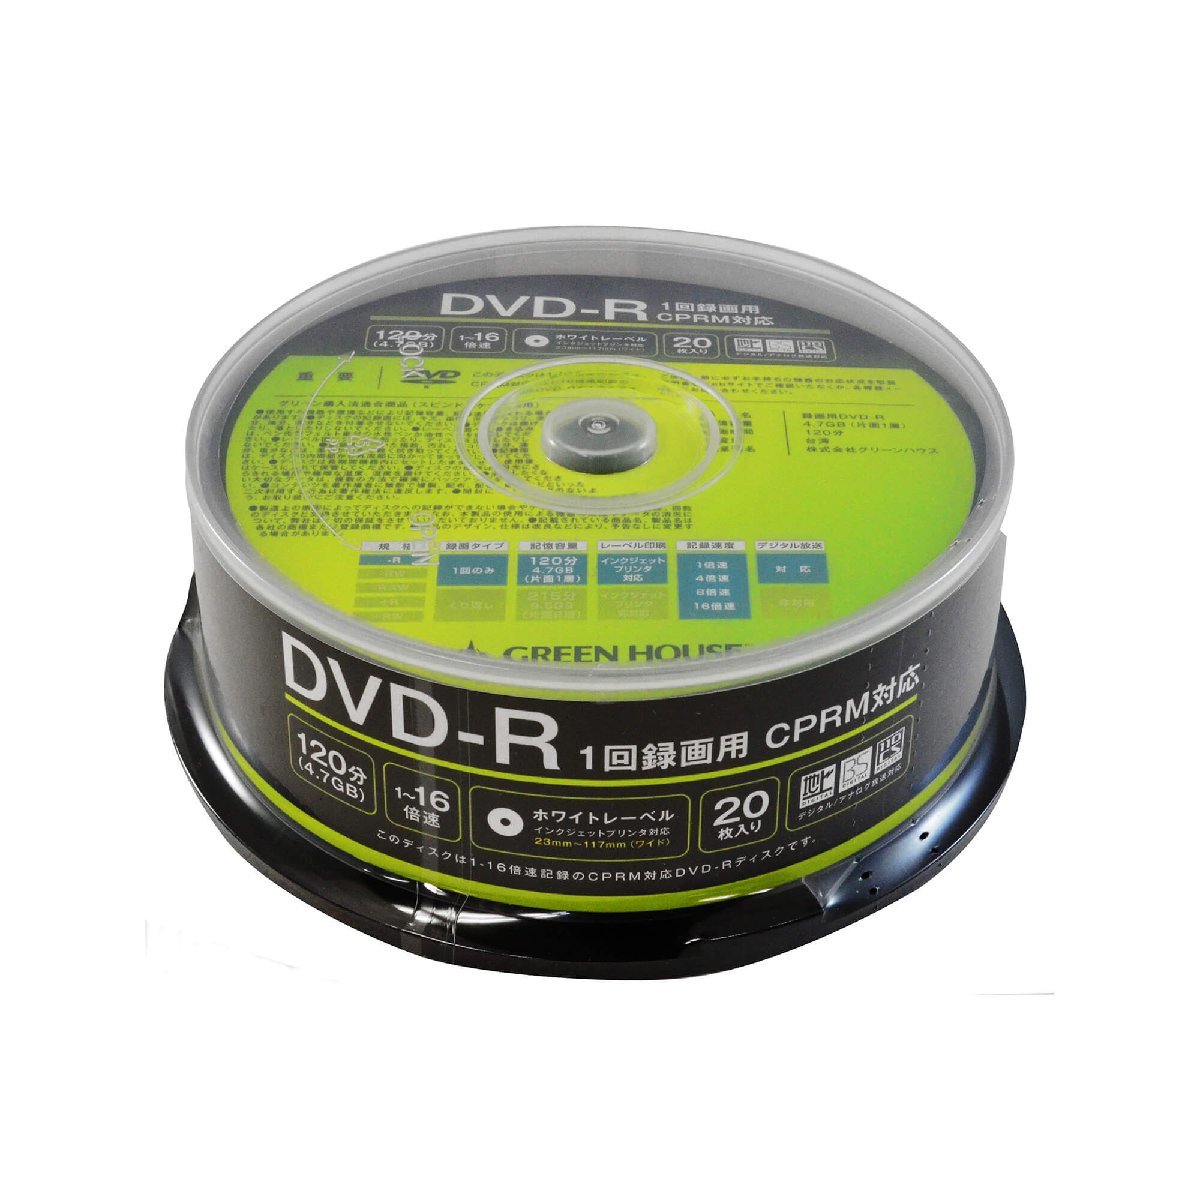 DVD-R CPRM video recording for 1-16 speed 20 sheets spindle green house GH-DVDRCA20/7634x1 piece / free shipping 